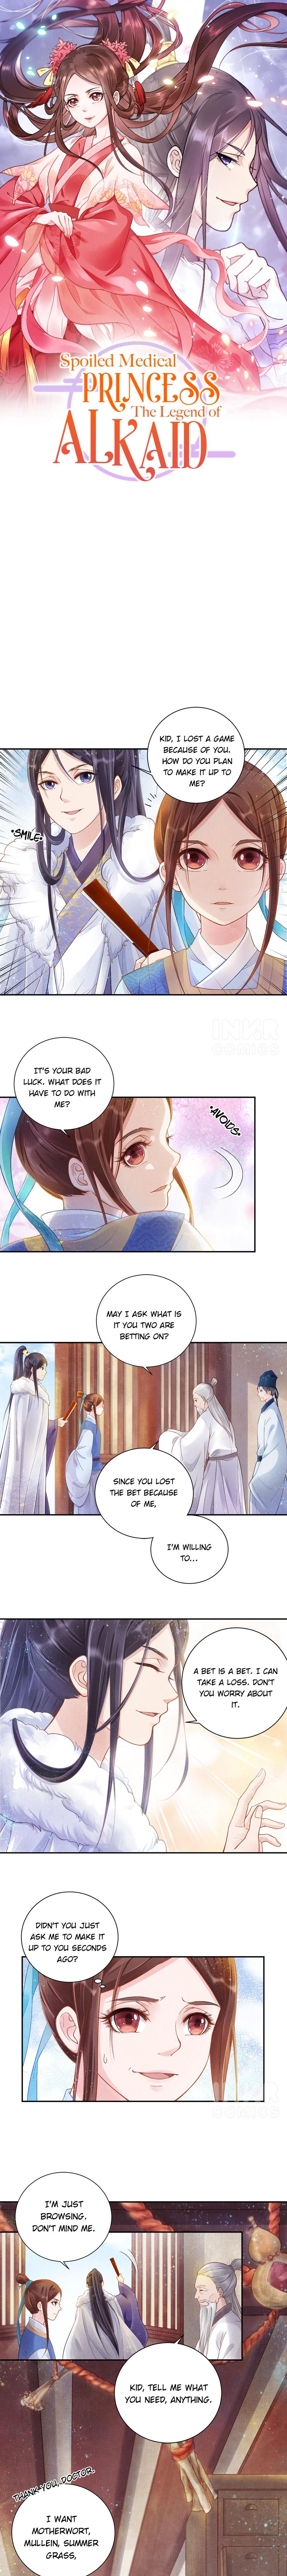 Spoiled Medical Princess: The Legend Of Alkaid - Page 1